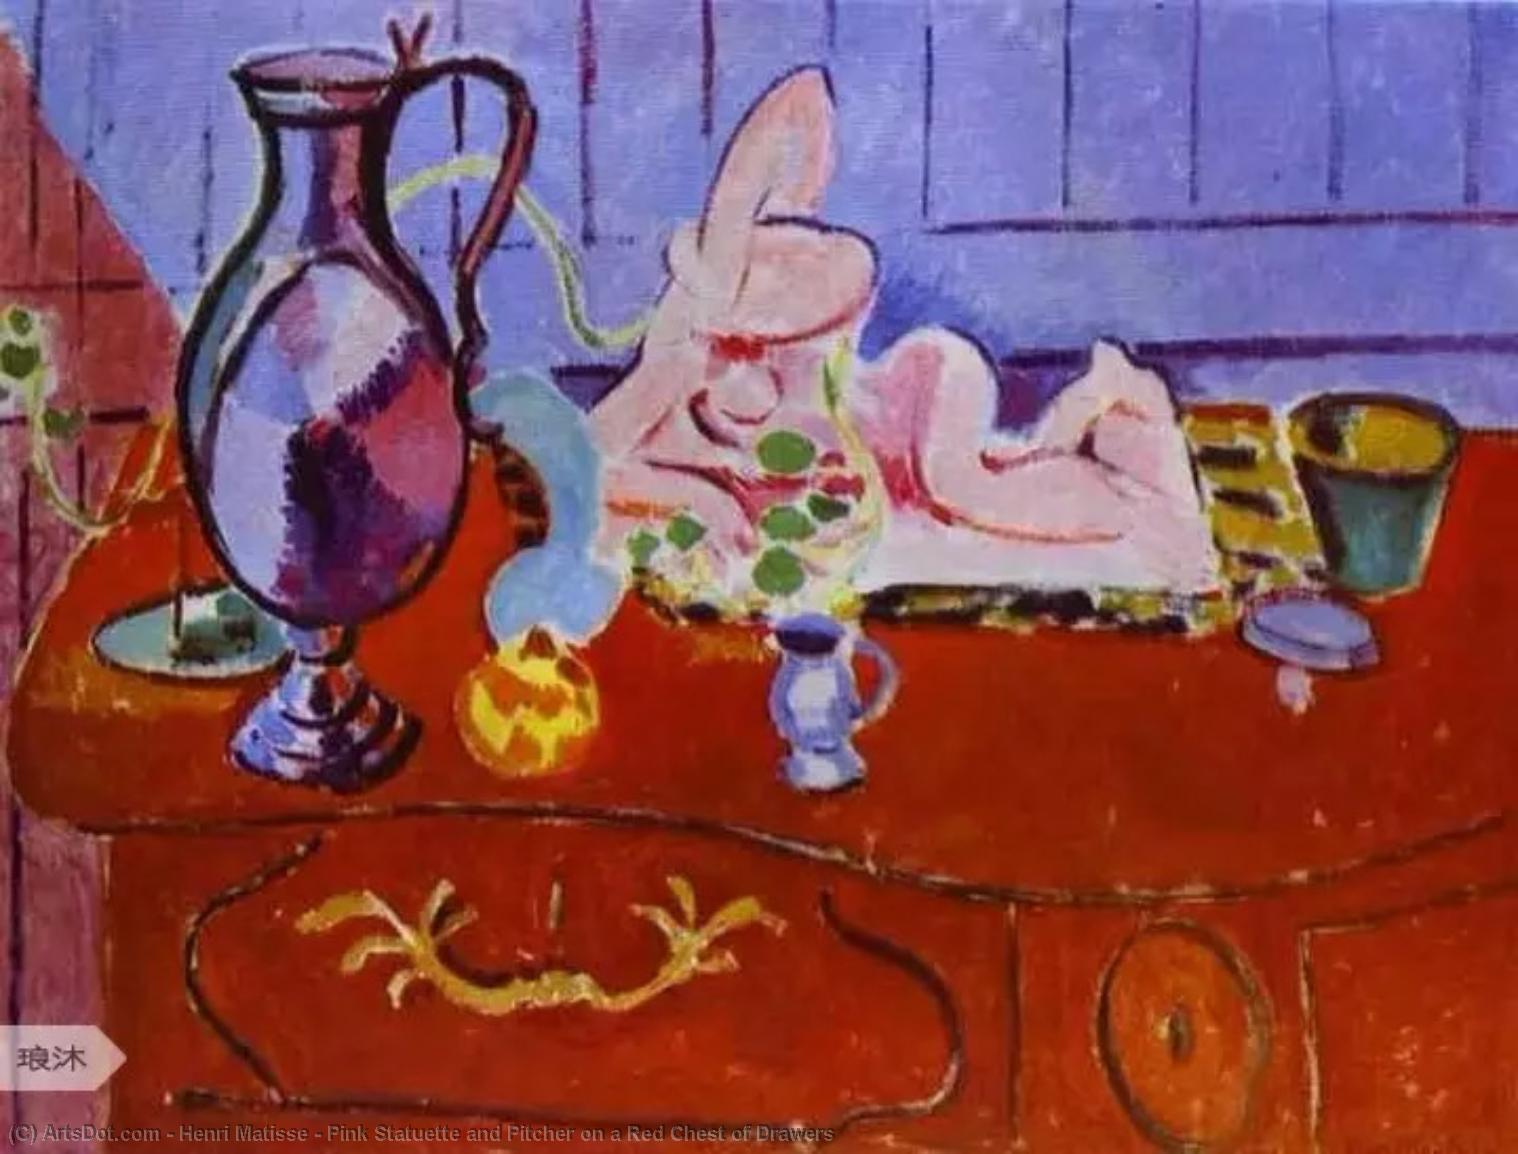 WikiOO.org - دایره المعارف هنرهای زیبا - نقاشی، آثار هنری Henri Matisse - Pink Statuette and Pitcher on a Red Chest of Drawers